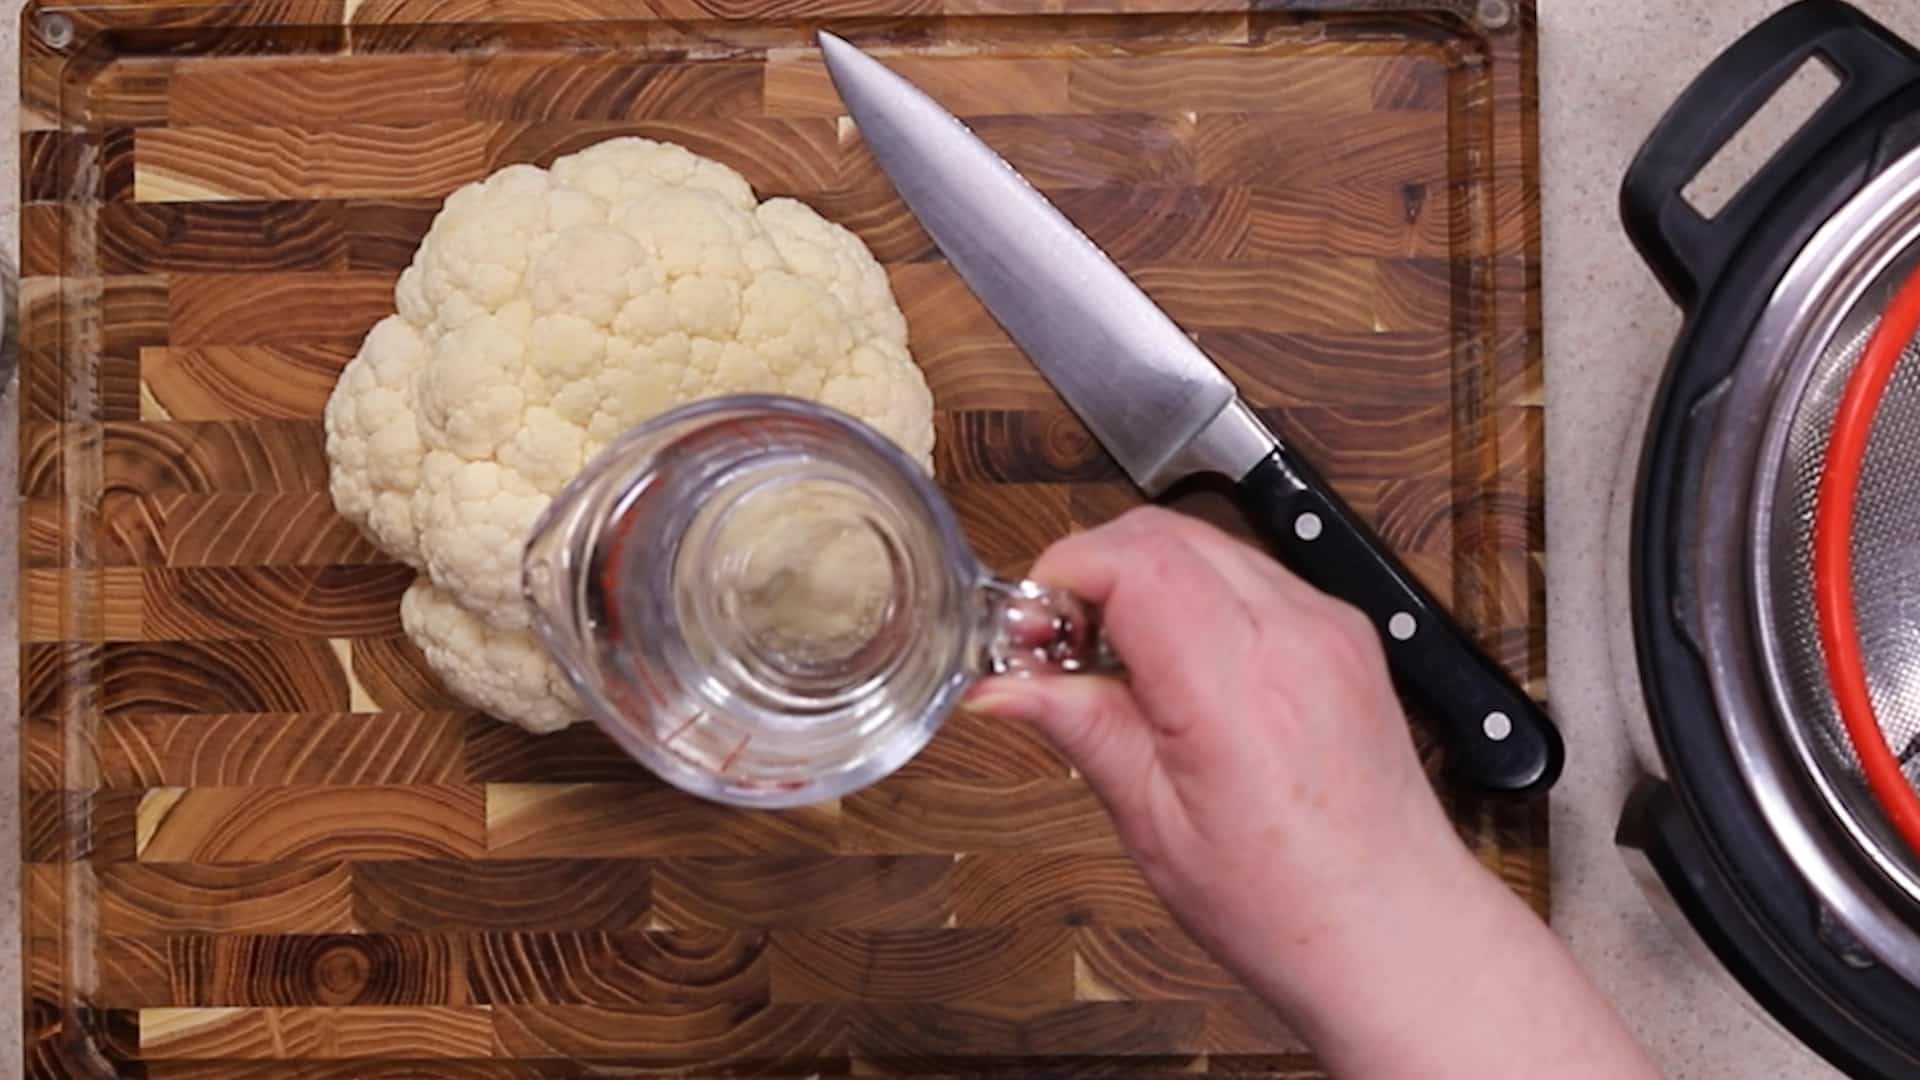 Head of Cauliflower Flower on a Cutting Board with Knife and a hand holding a glass of water.